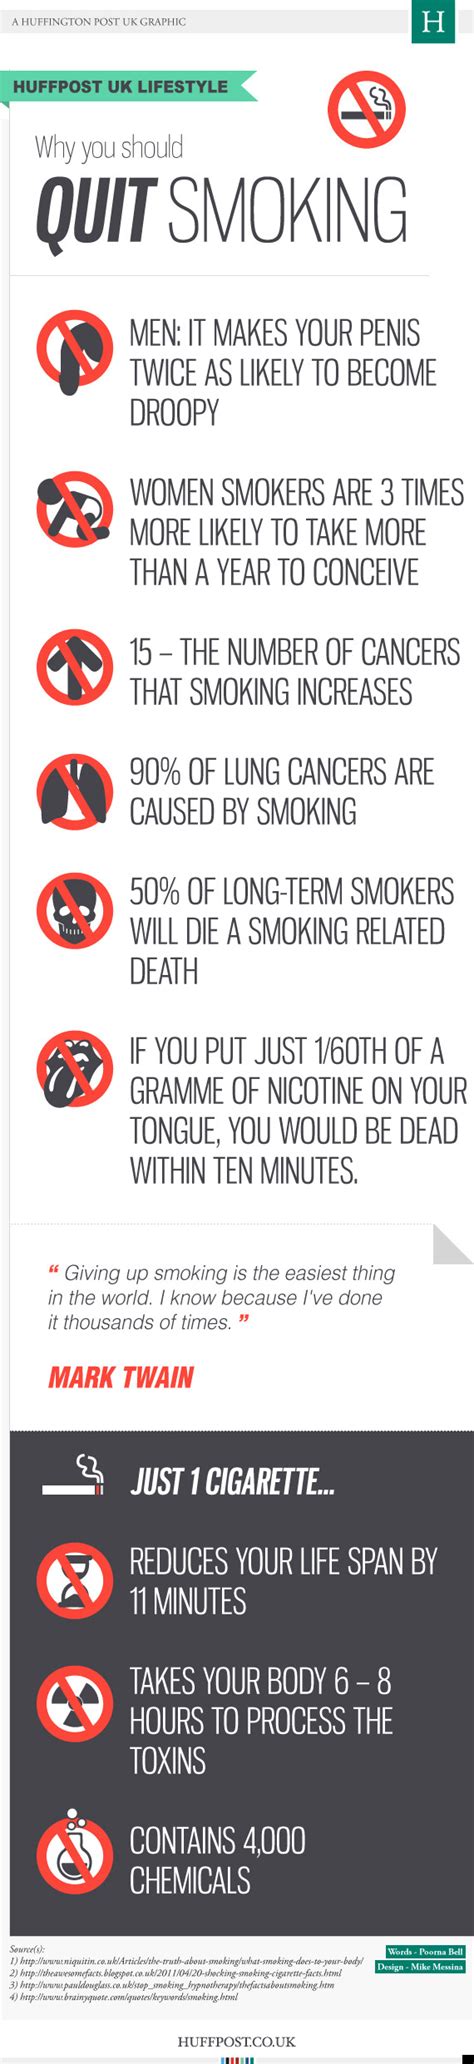 stoptober why you should stop smoking infographic